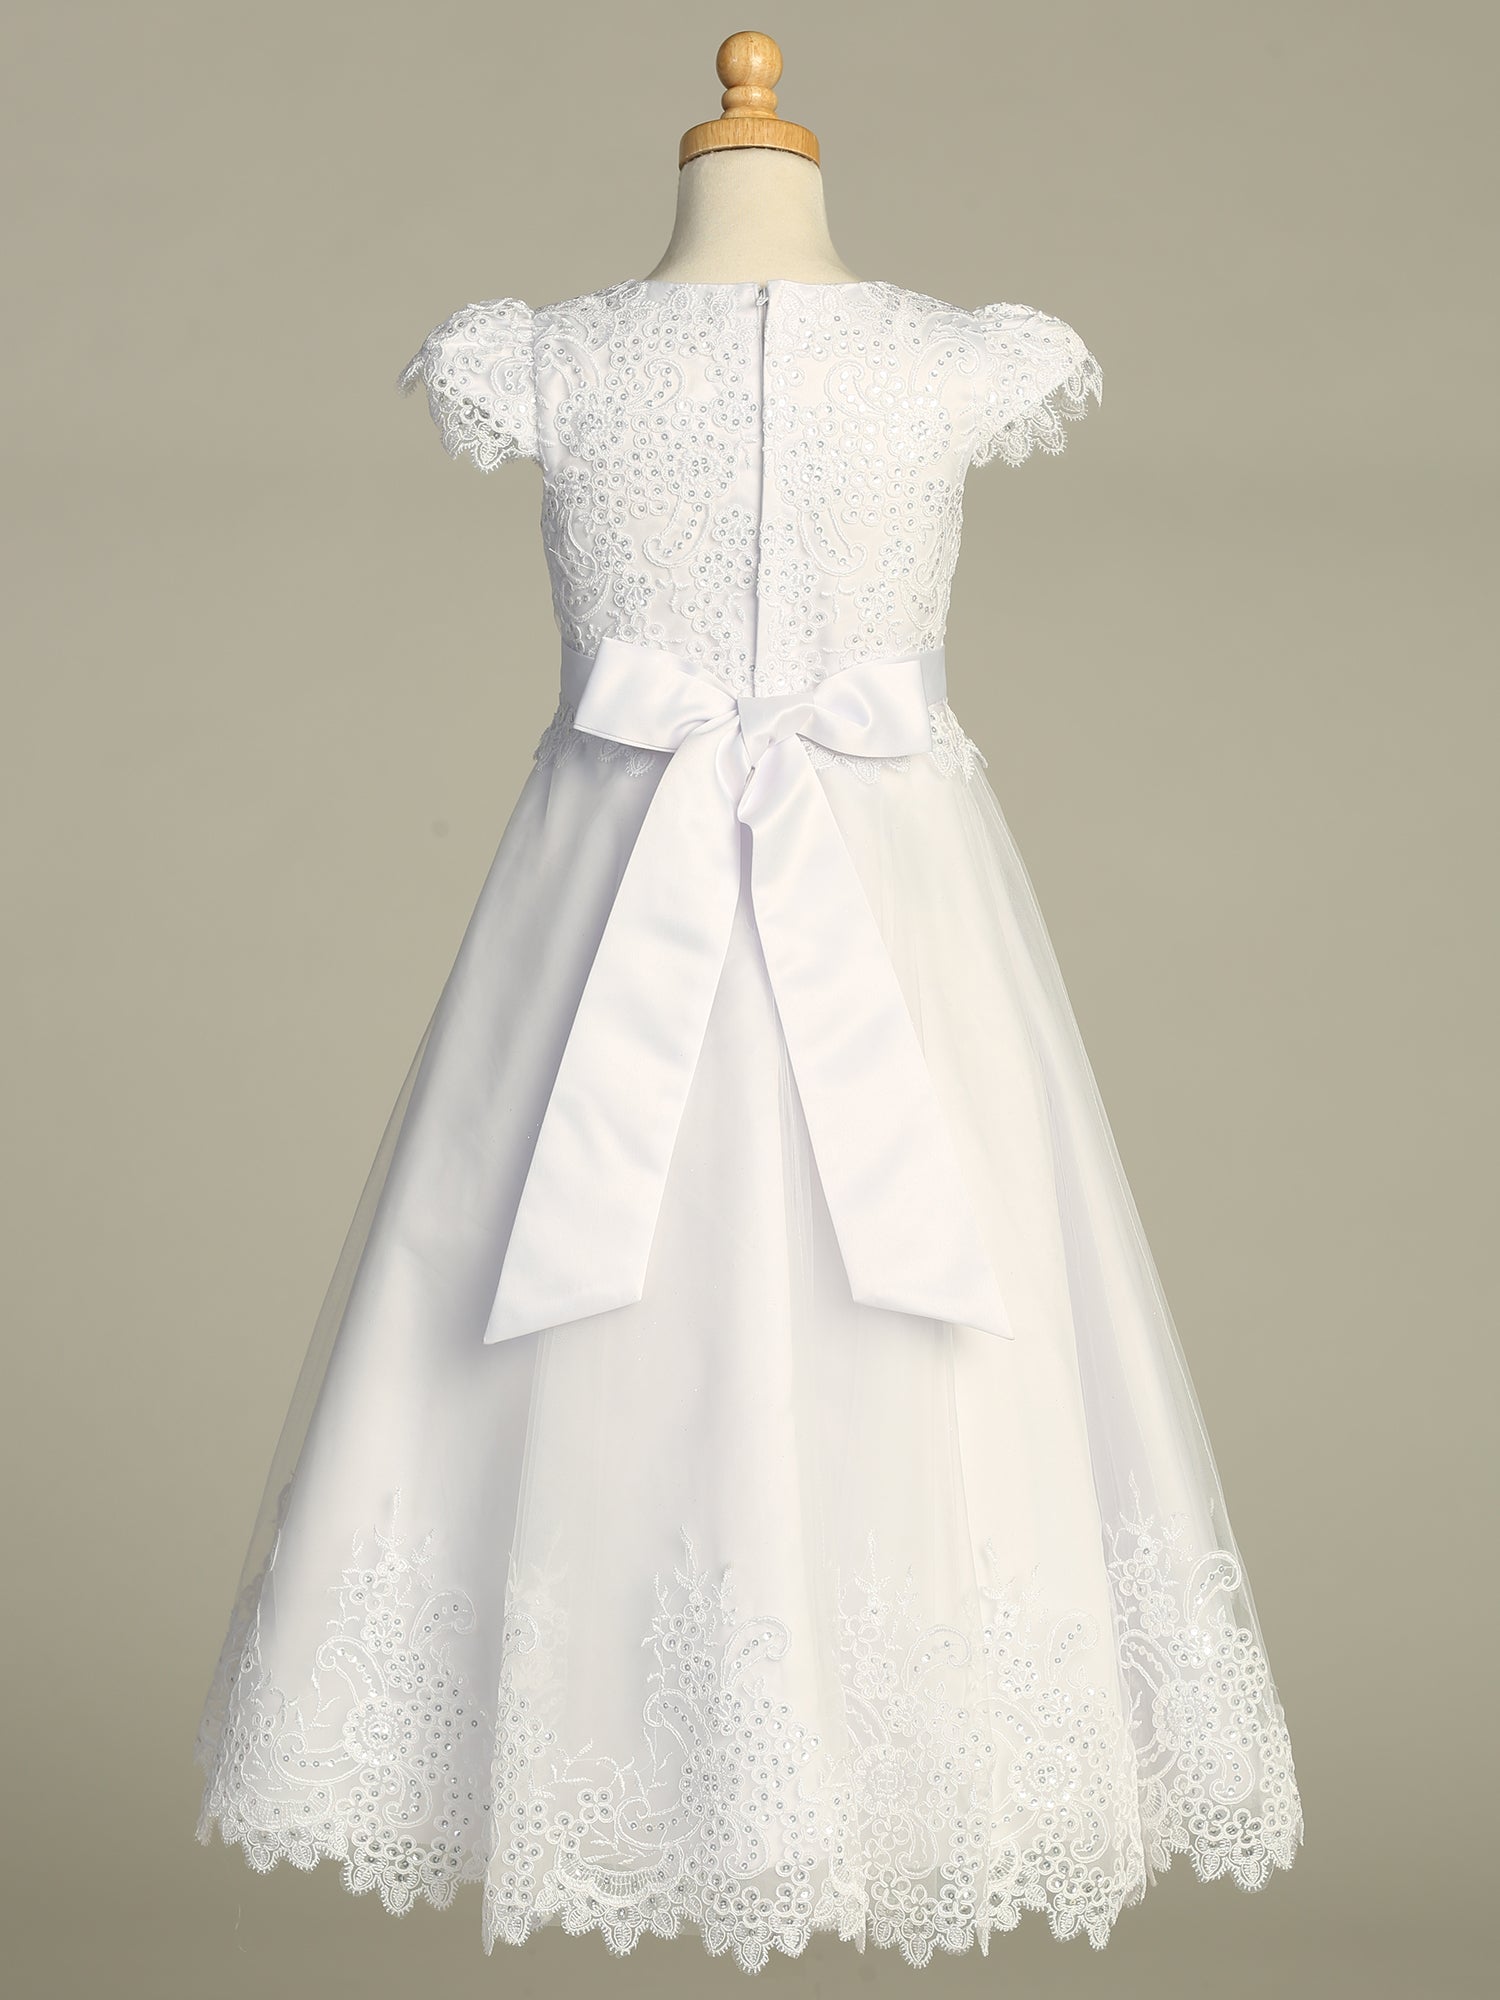 Close-up view of the embroidered tulle skirt adorned with sequins on the First Communion Dress.